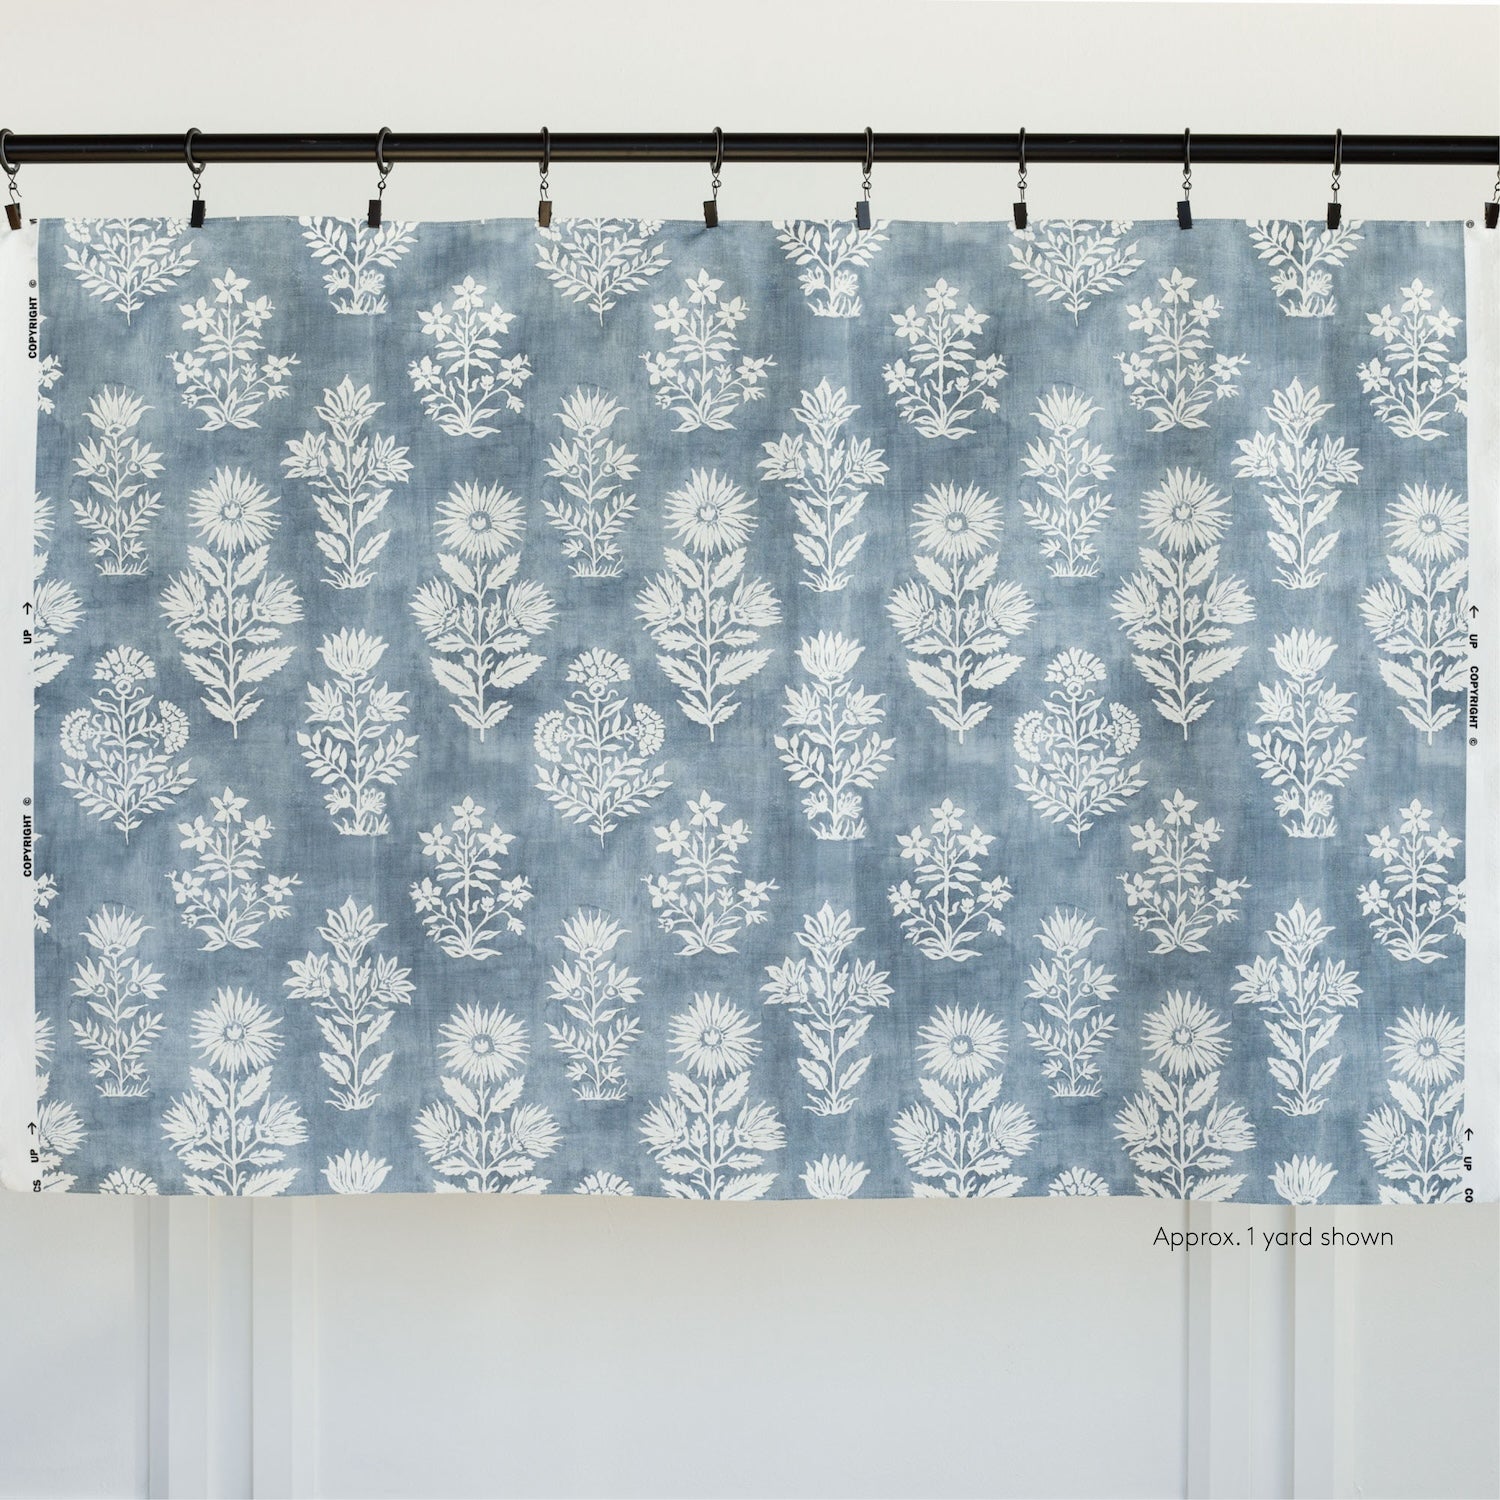 a blue and white batik inspired, large scaled floral print drapery fabric from Tonic Living